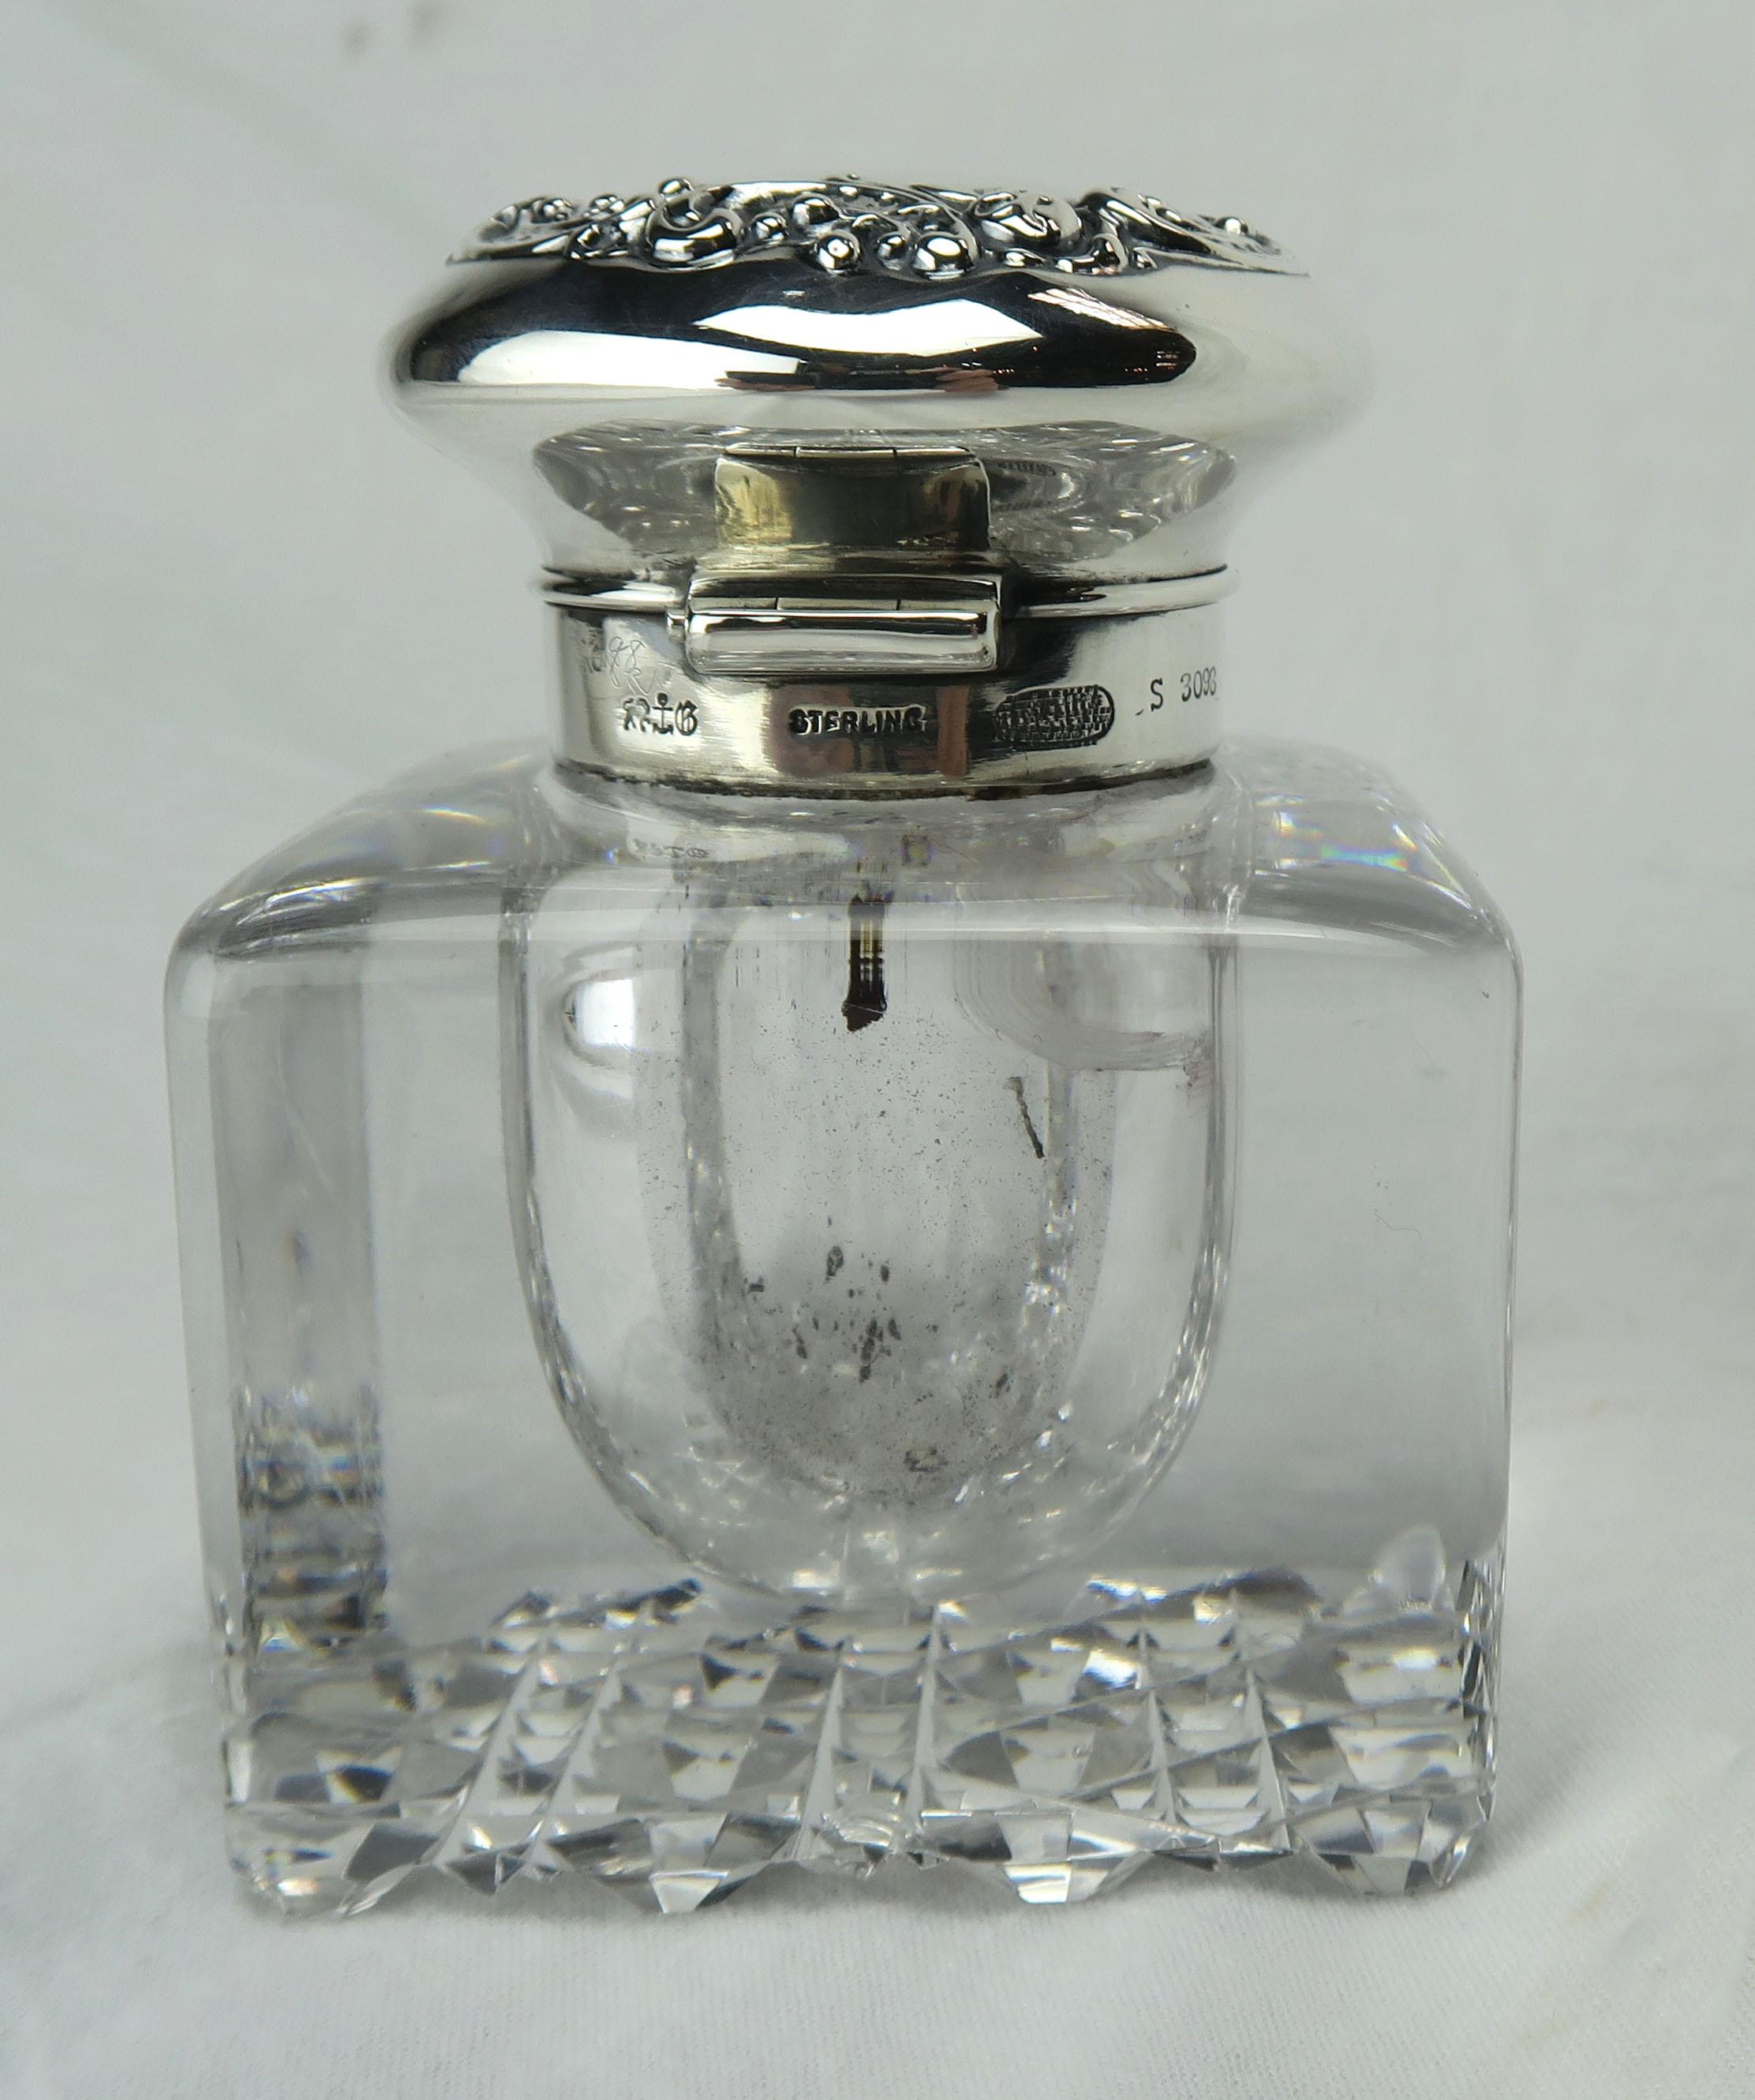 Gorham Silver company cut crystal and sterling silver ink-well with Hallmark stamped on lid.

Condition: Notes excellent overall condition with tiny chip on edge of underside-did not even notice-but you can slightly feel it upon touch.



   